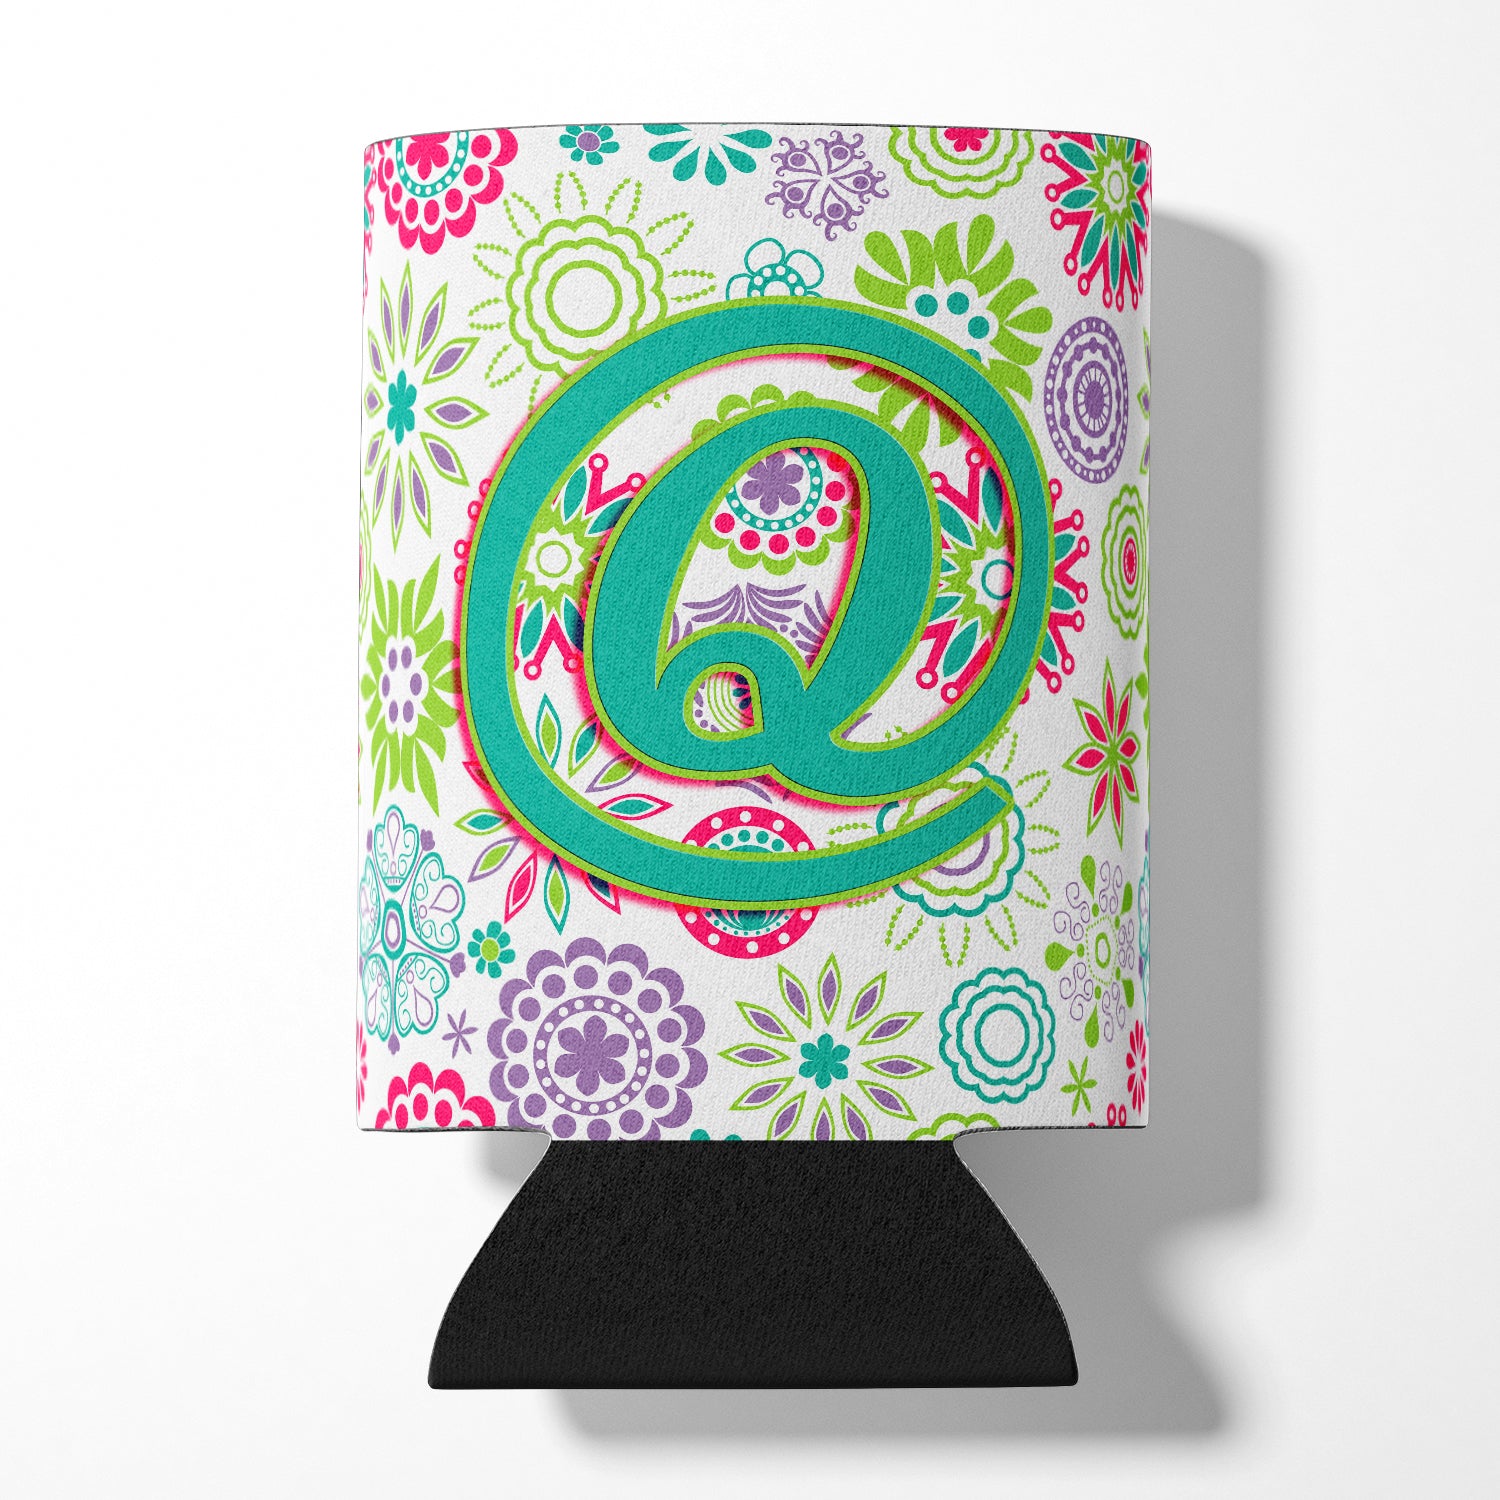 Letter Q Flowers Pink Teal Green Initial Can or Bottle Hugger CJ2011-QCC